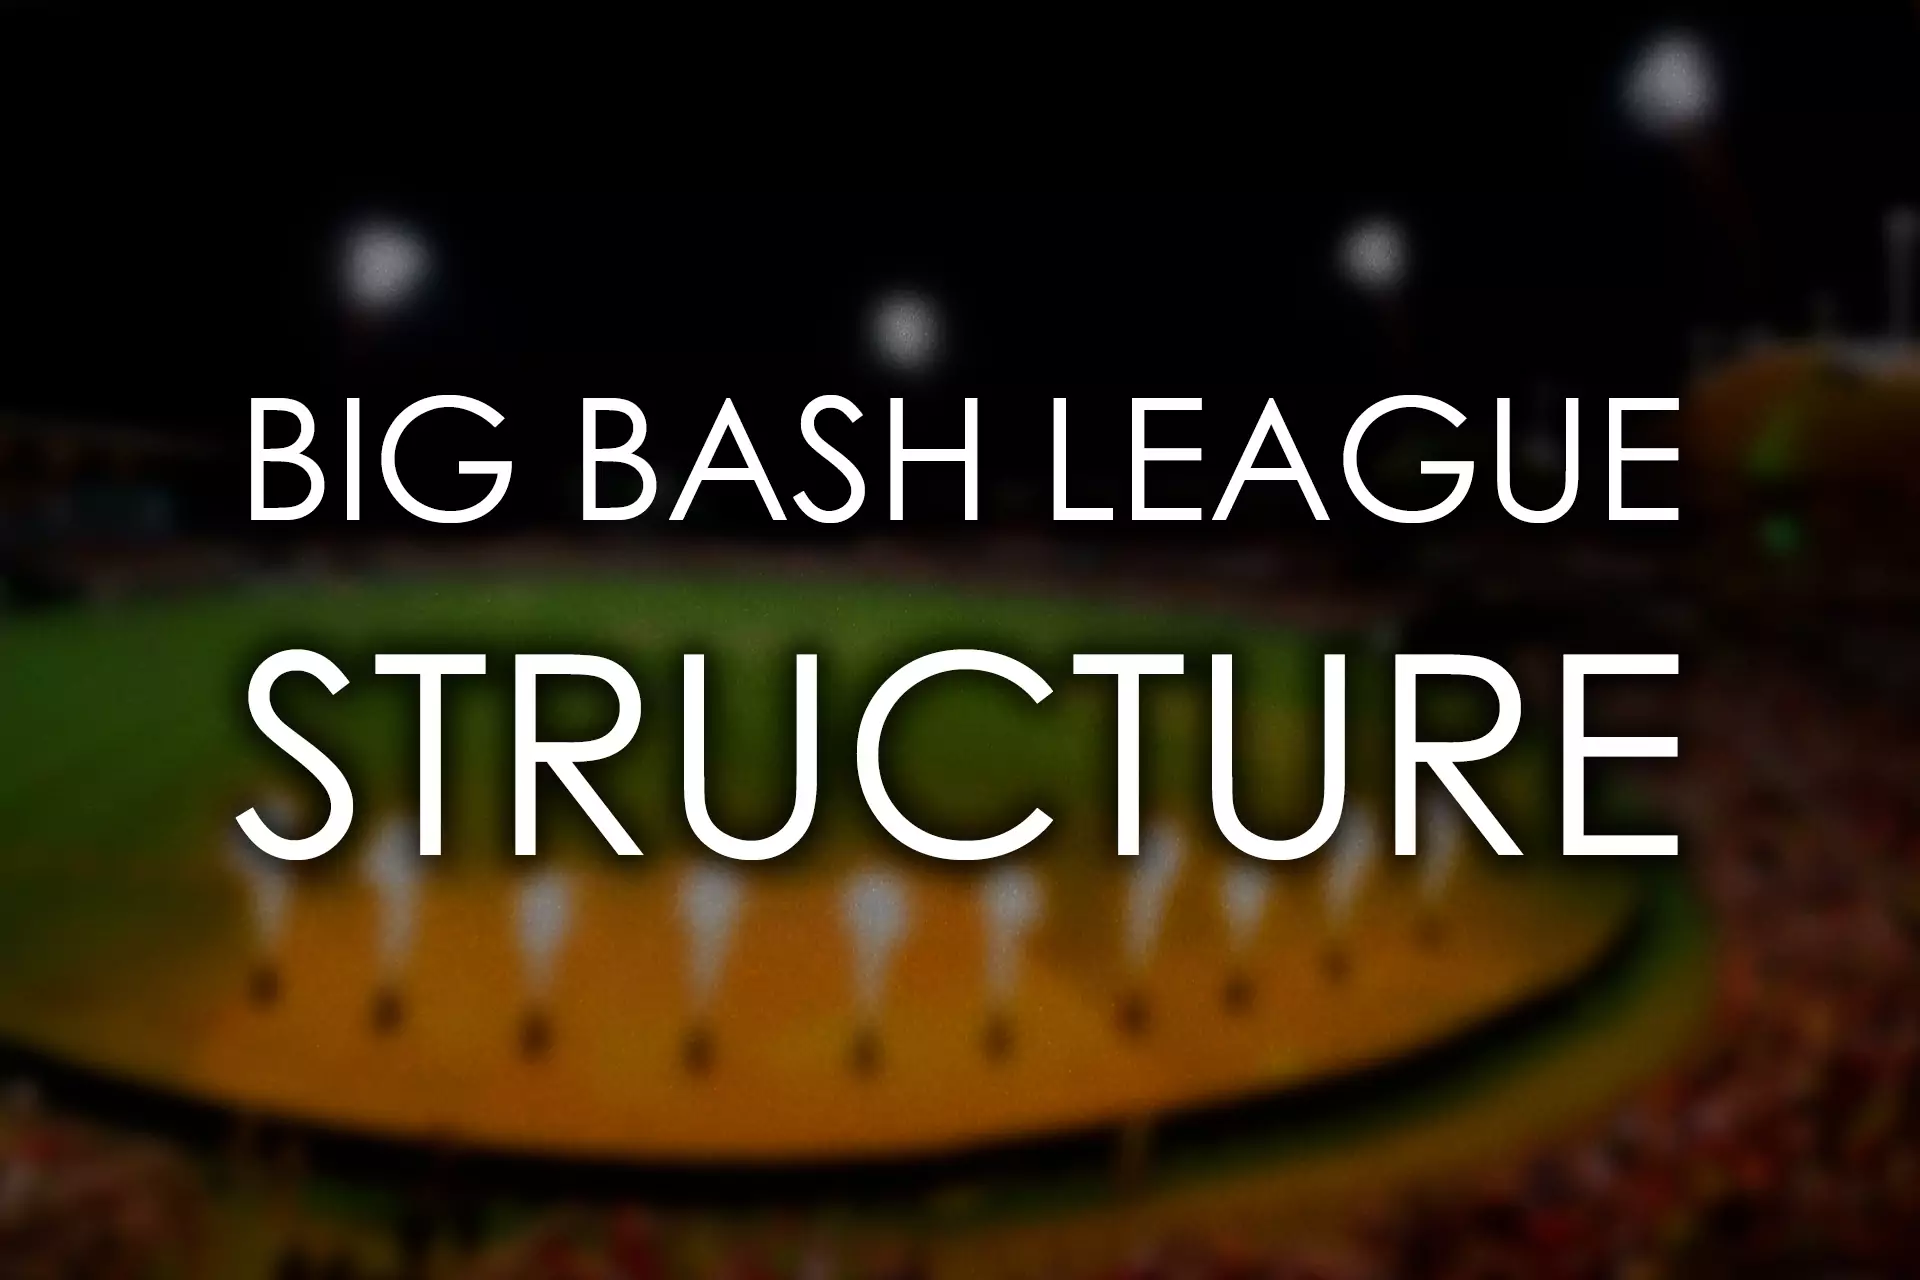 Before betting on the Big Bash League events learn the structure of the tournament.